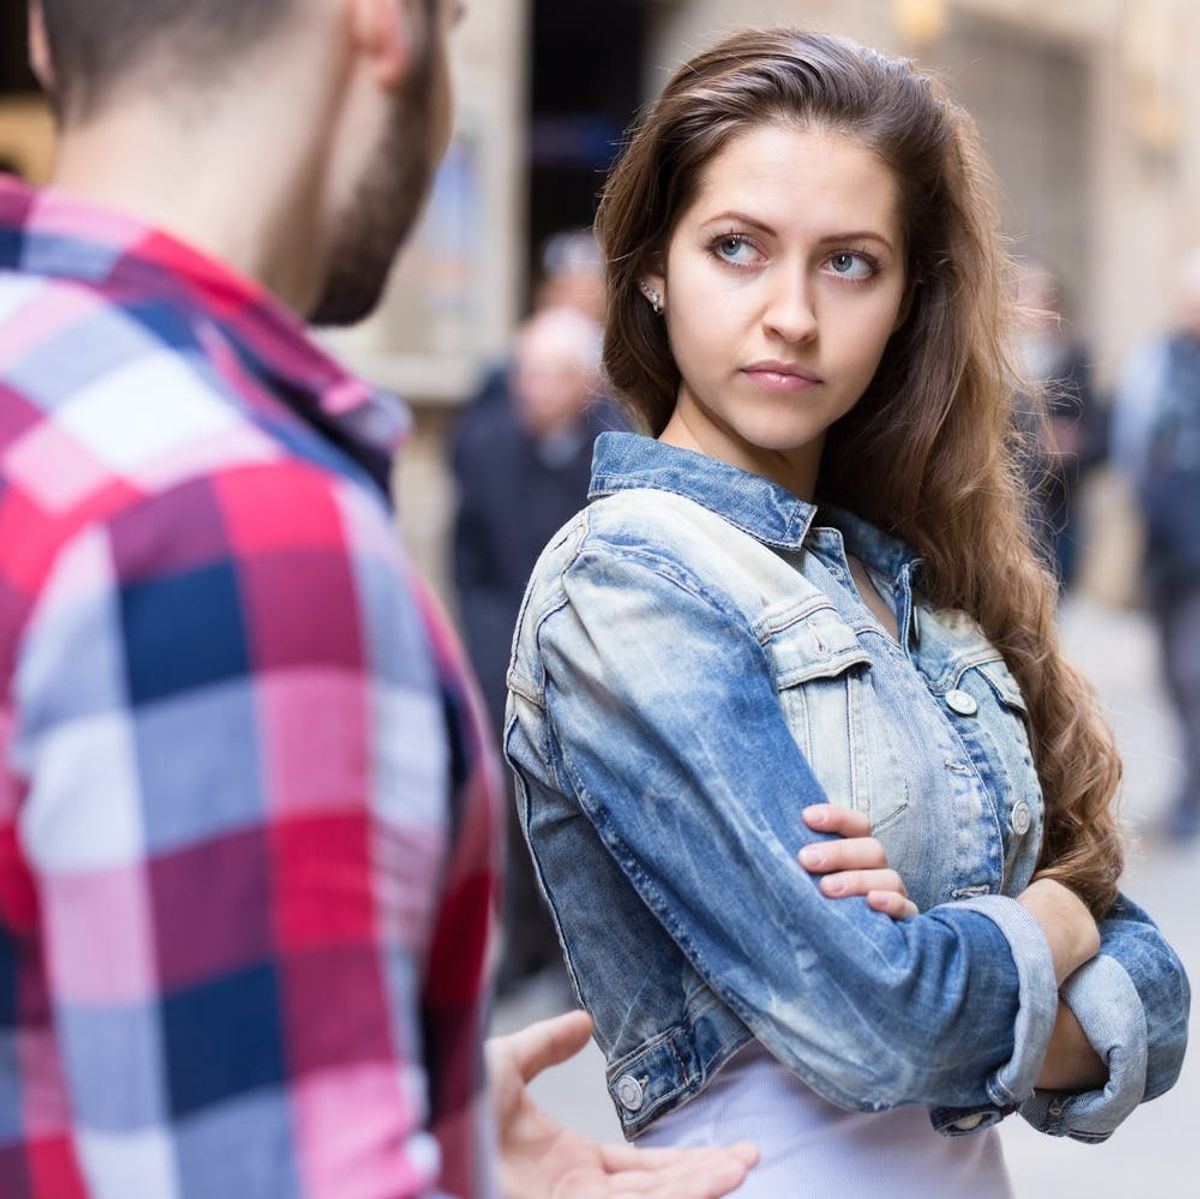 This Study on Why Men Catcall Women Will Infuriate You